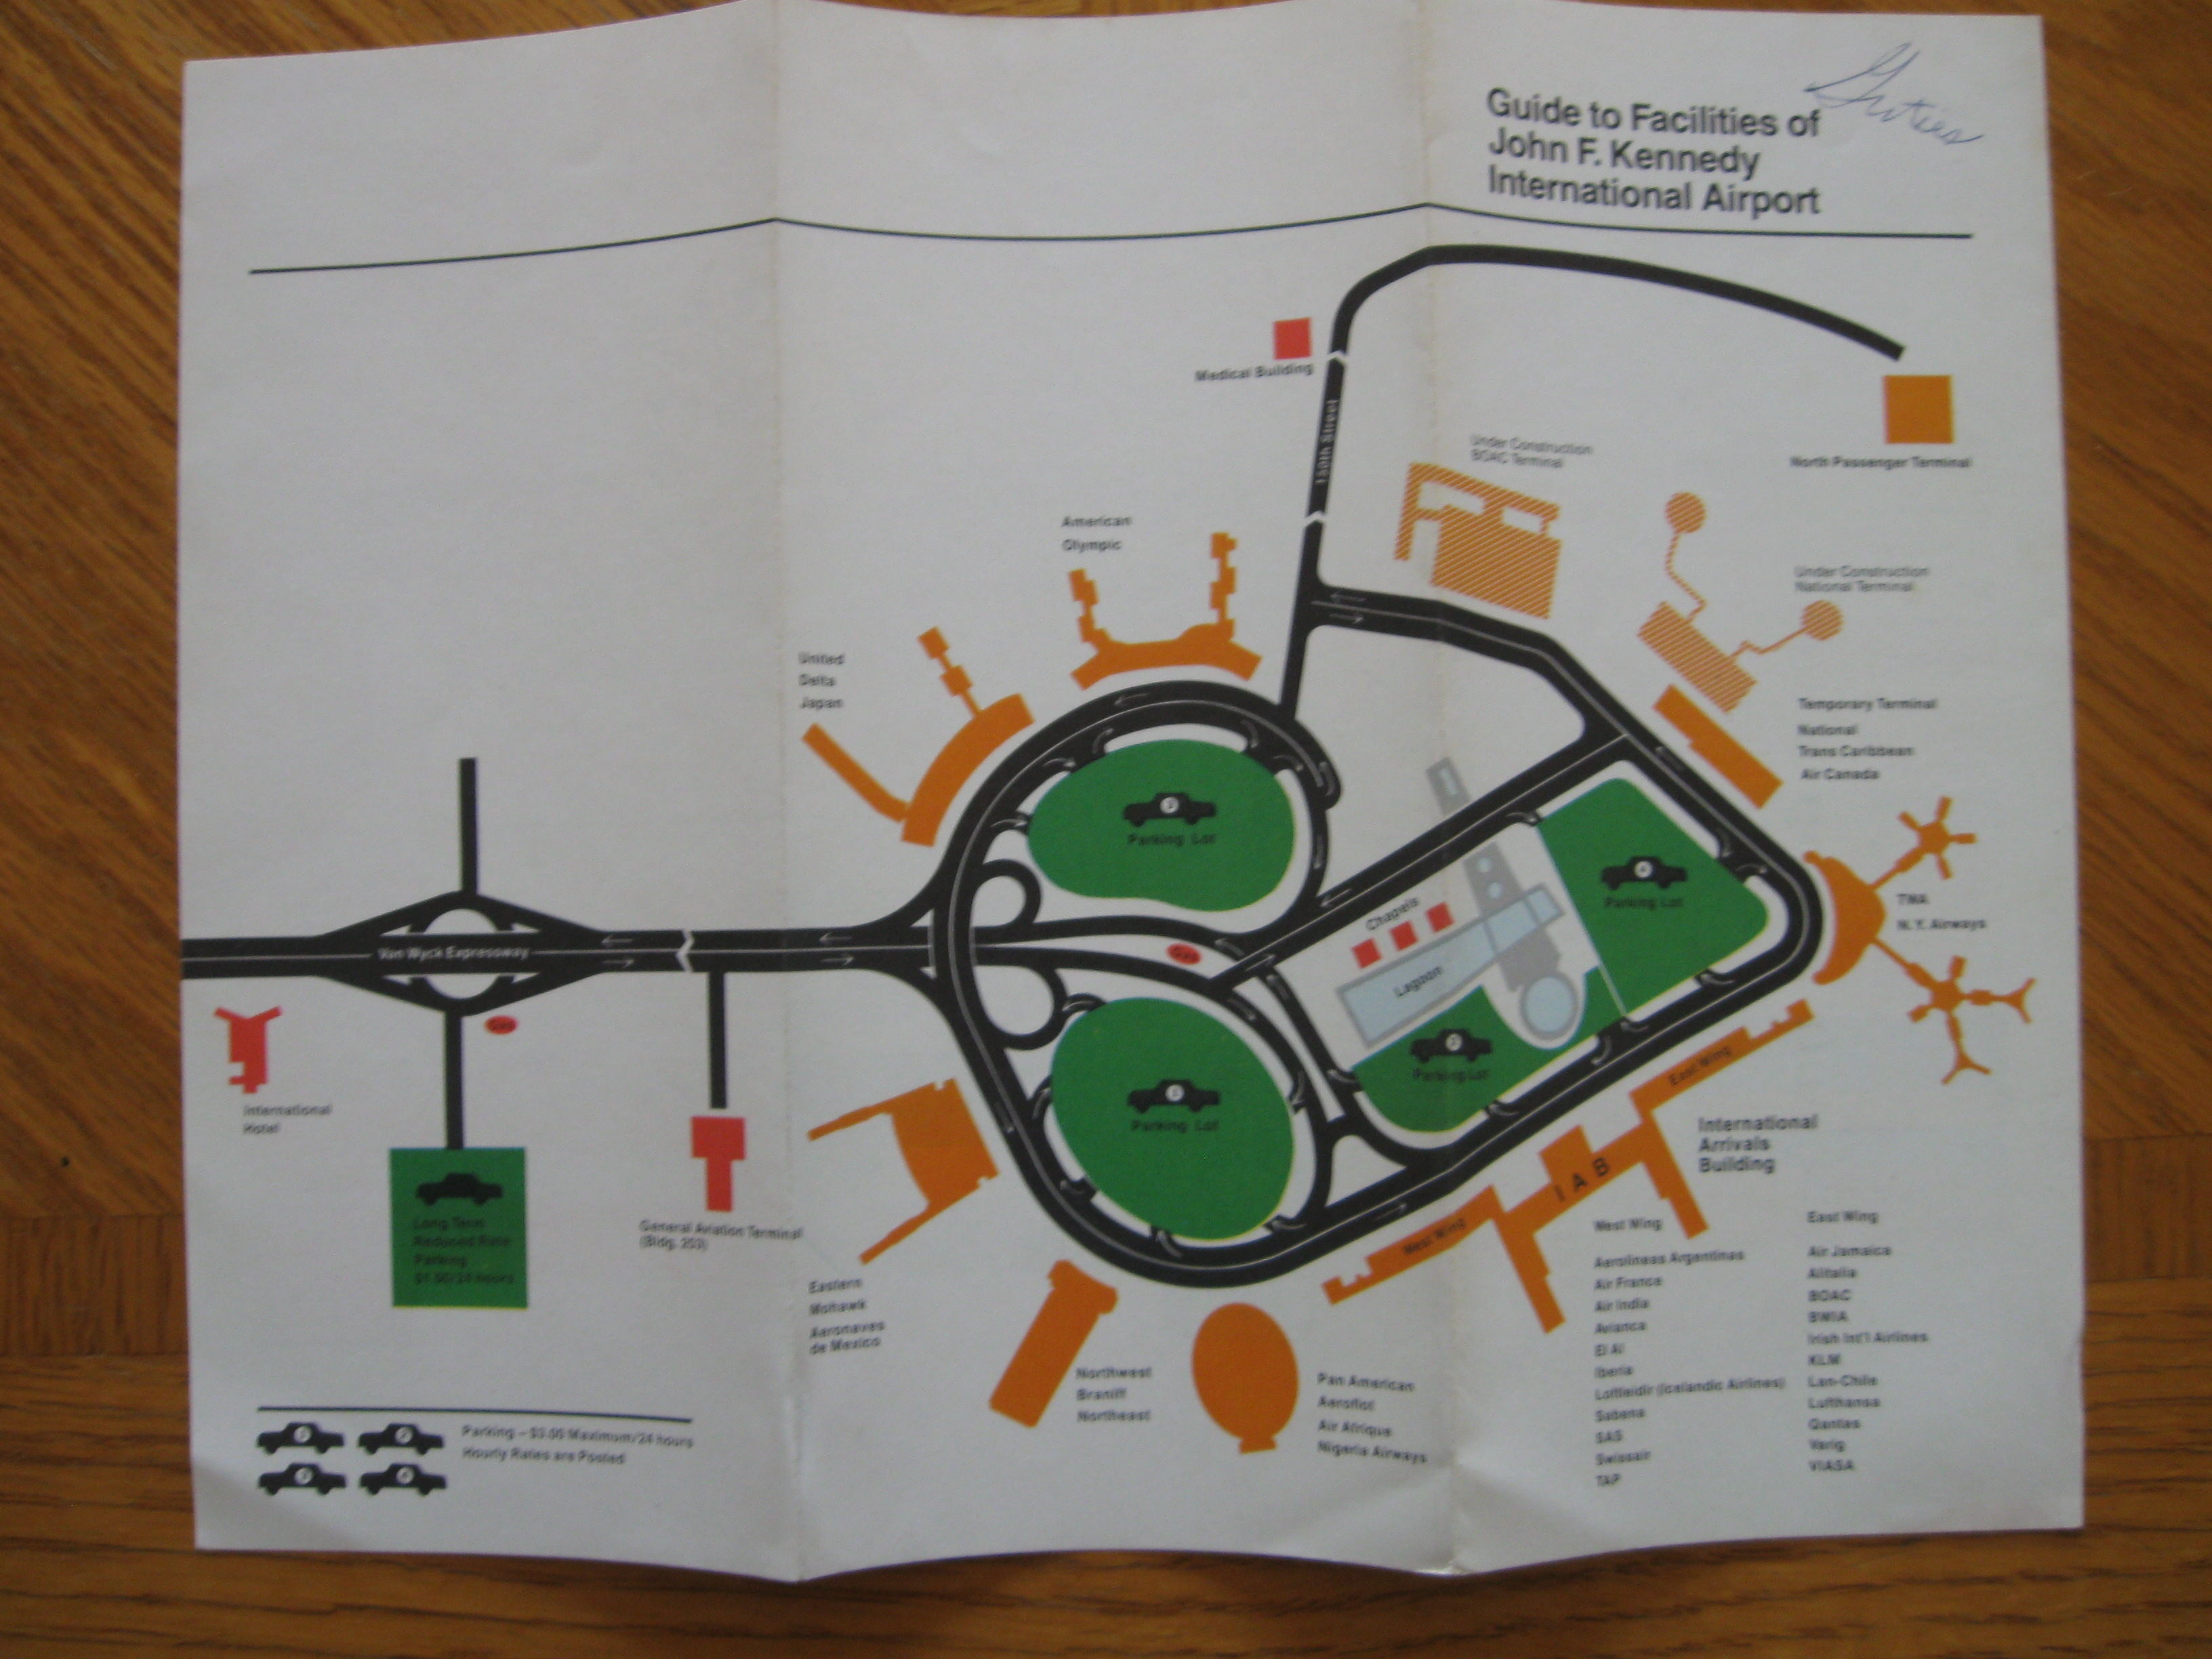 Guide to Facilities of John F Kennedy Airport 1968